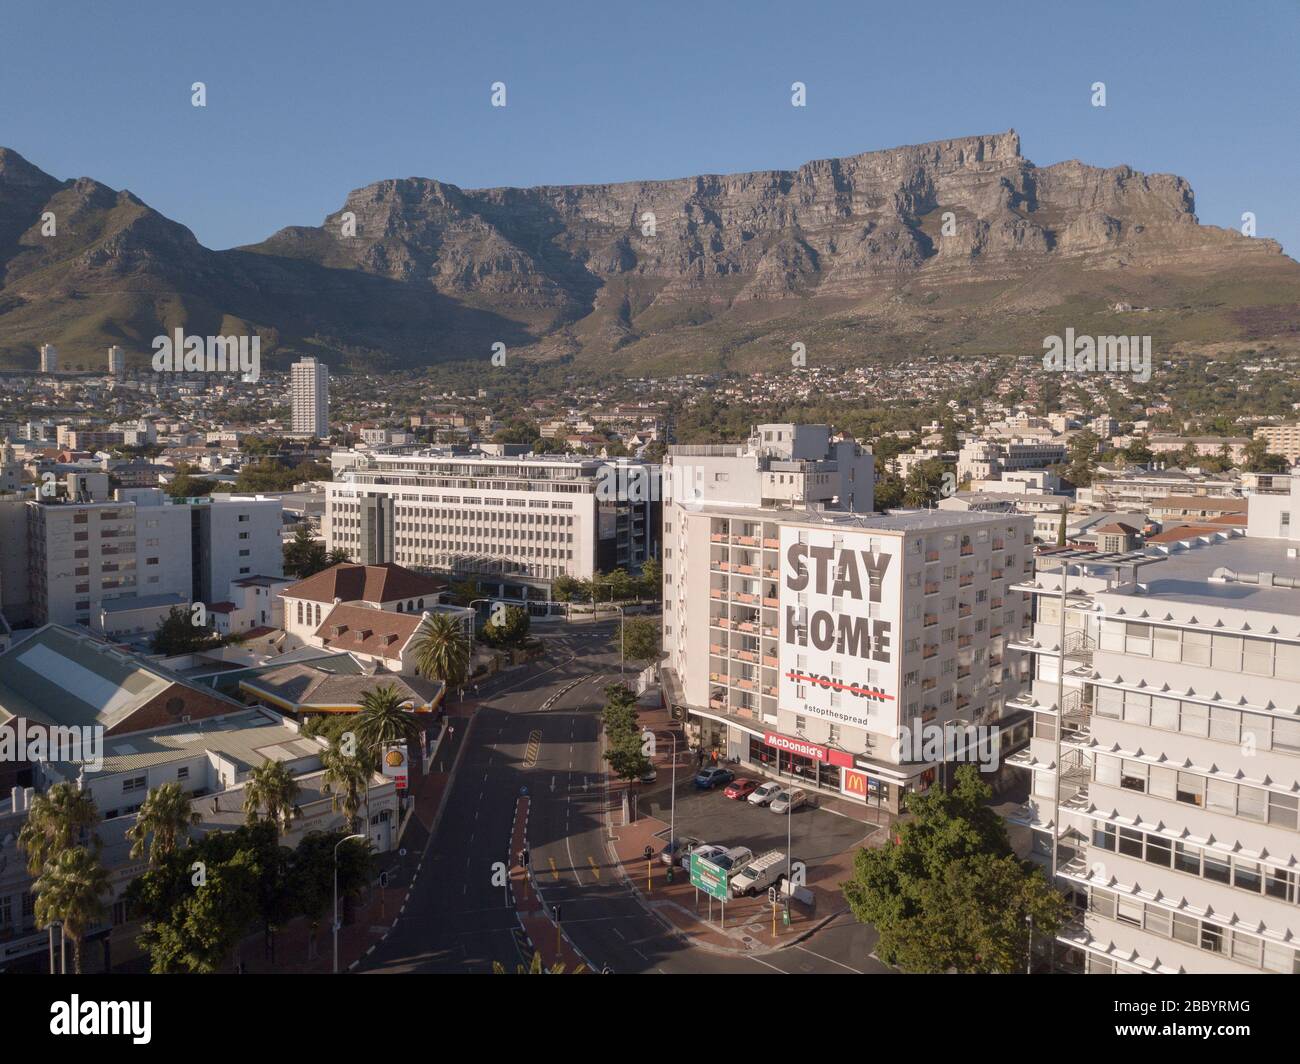 2 April 2020 - Cape Town, South Africa: Aerial view of empty streets in Cape Town, South Africa during the Covid 19 lockdown. Stock Photo